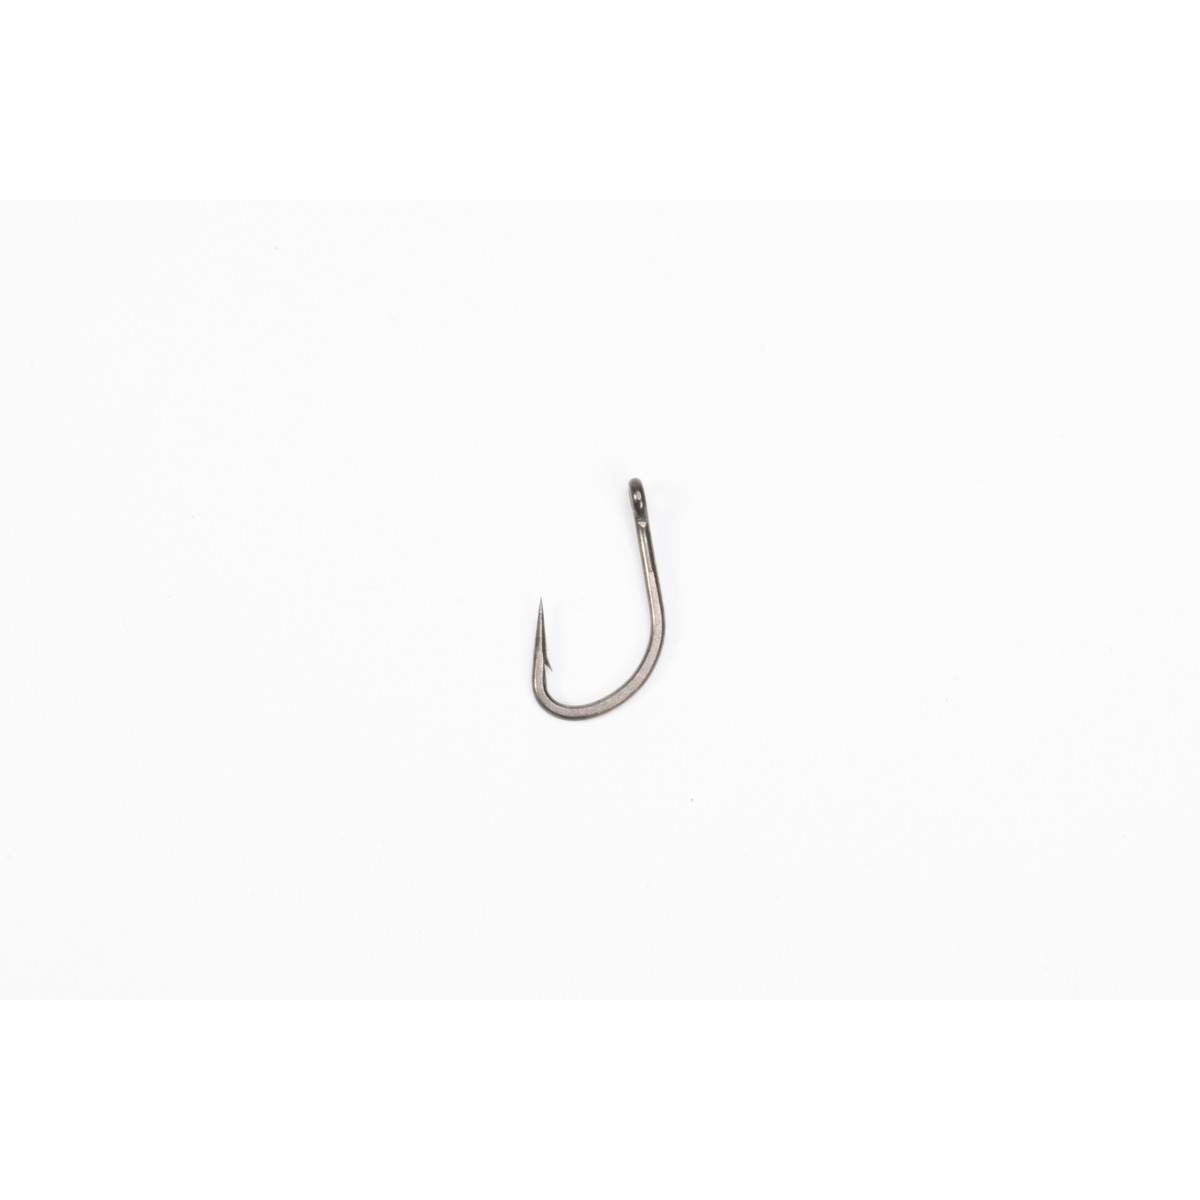 Nash Pinpoint Brute - Size 8 Micro Barbed